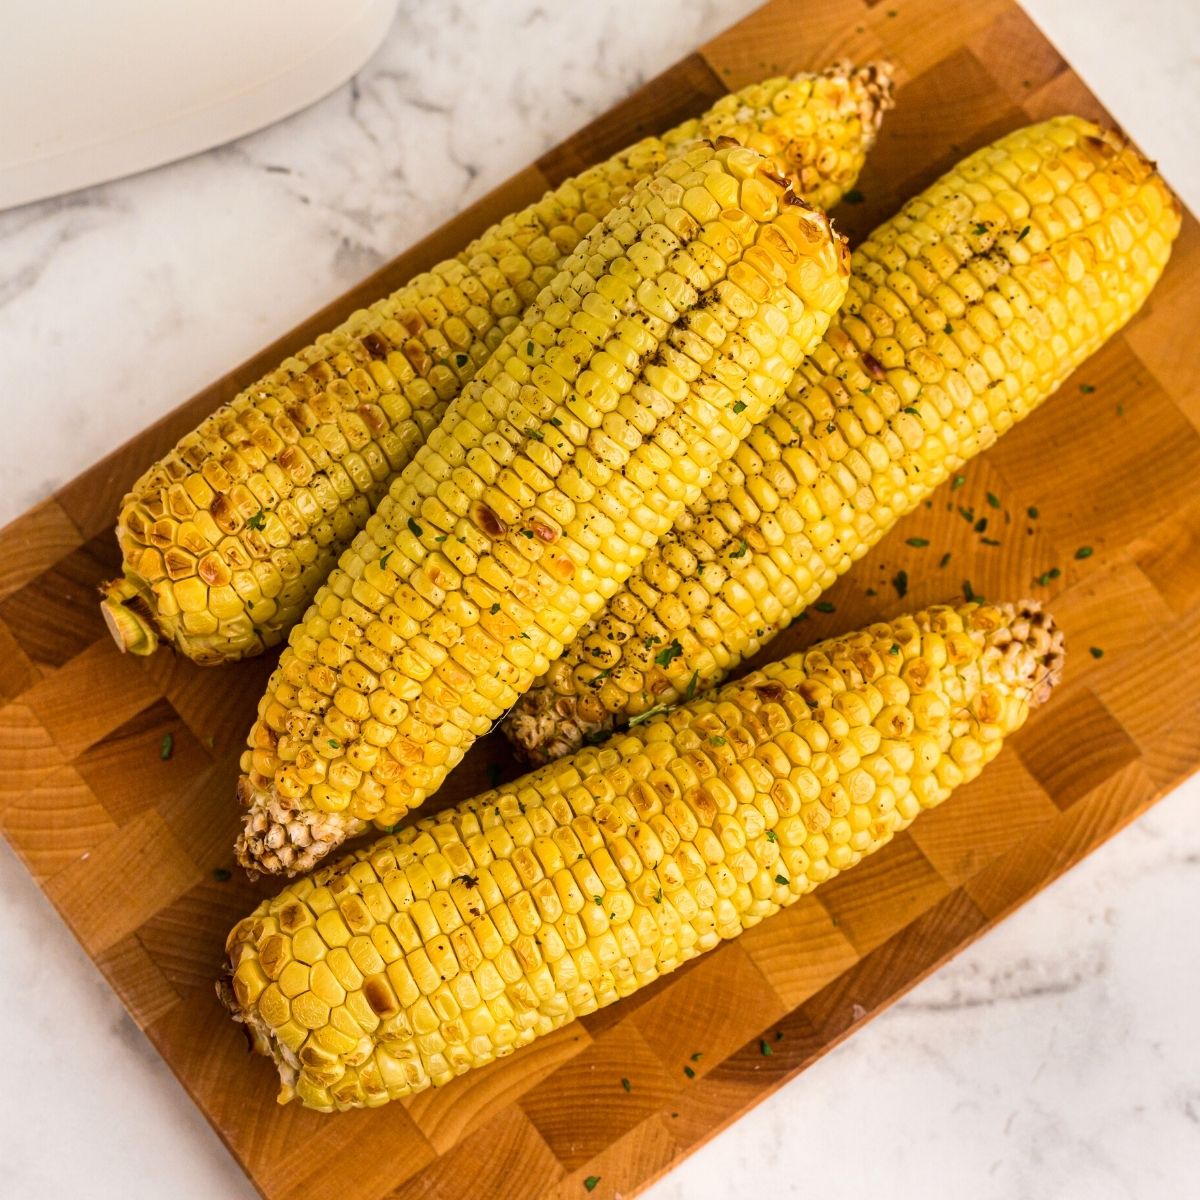 Golden ears of corn on a board, buttered and seasoned.